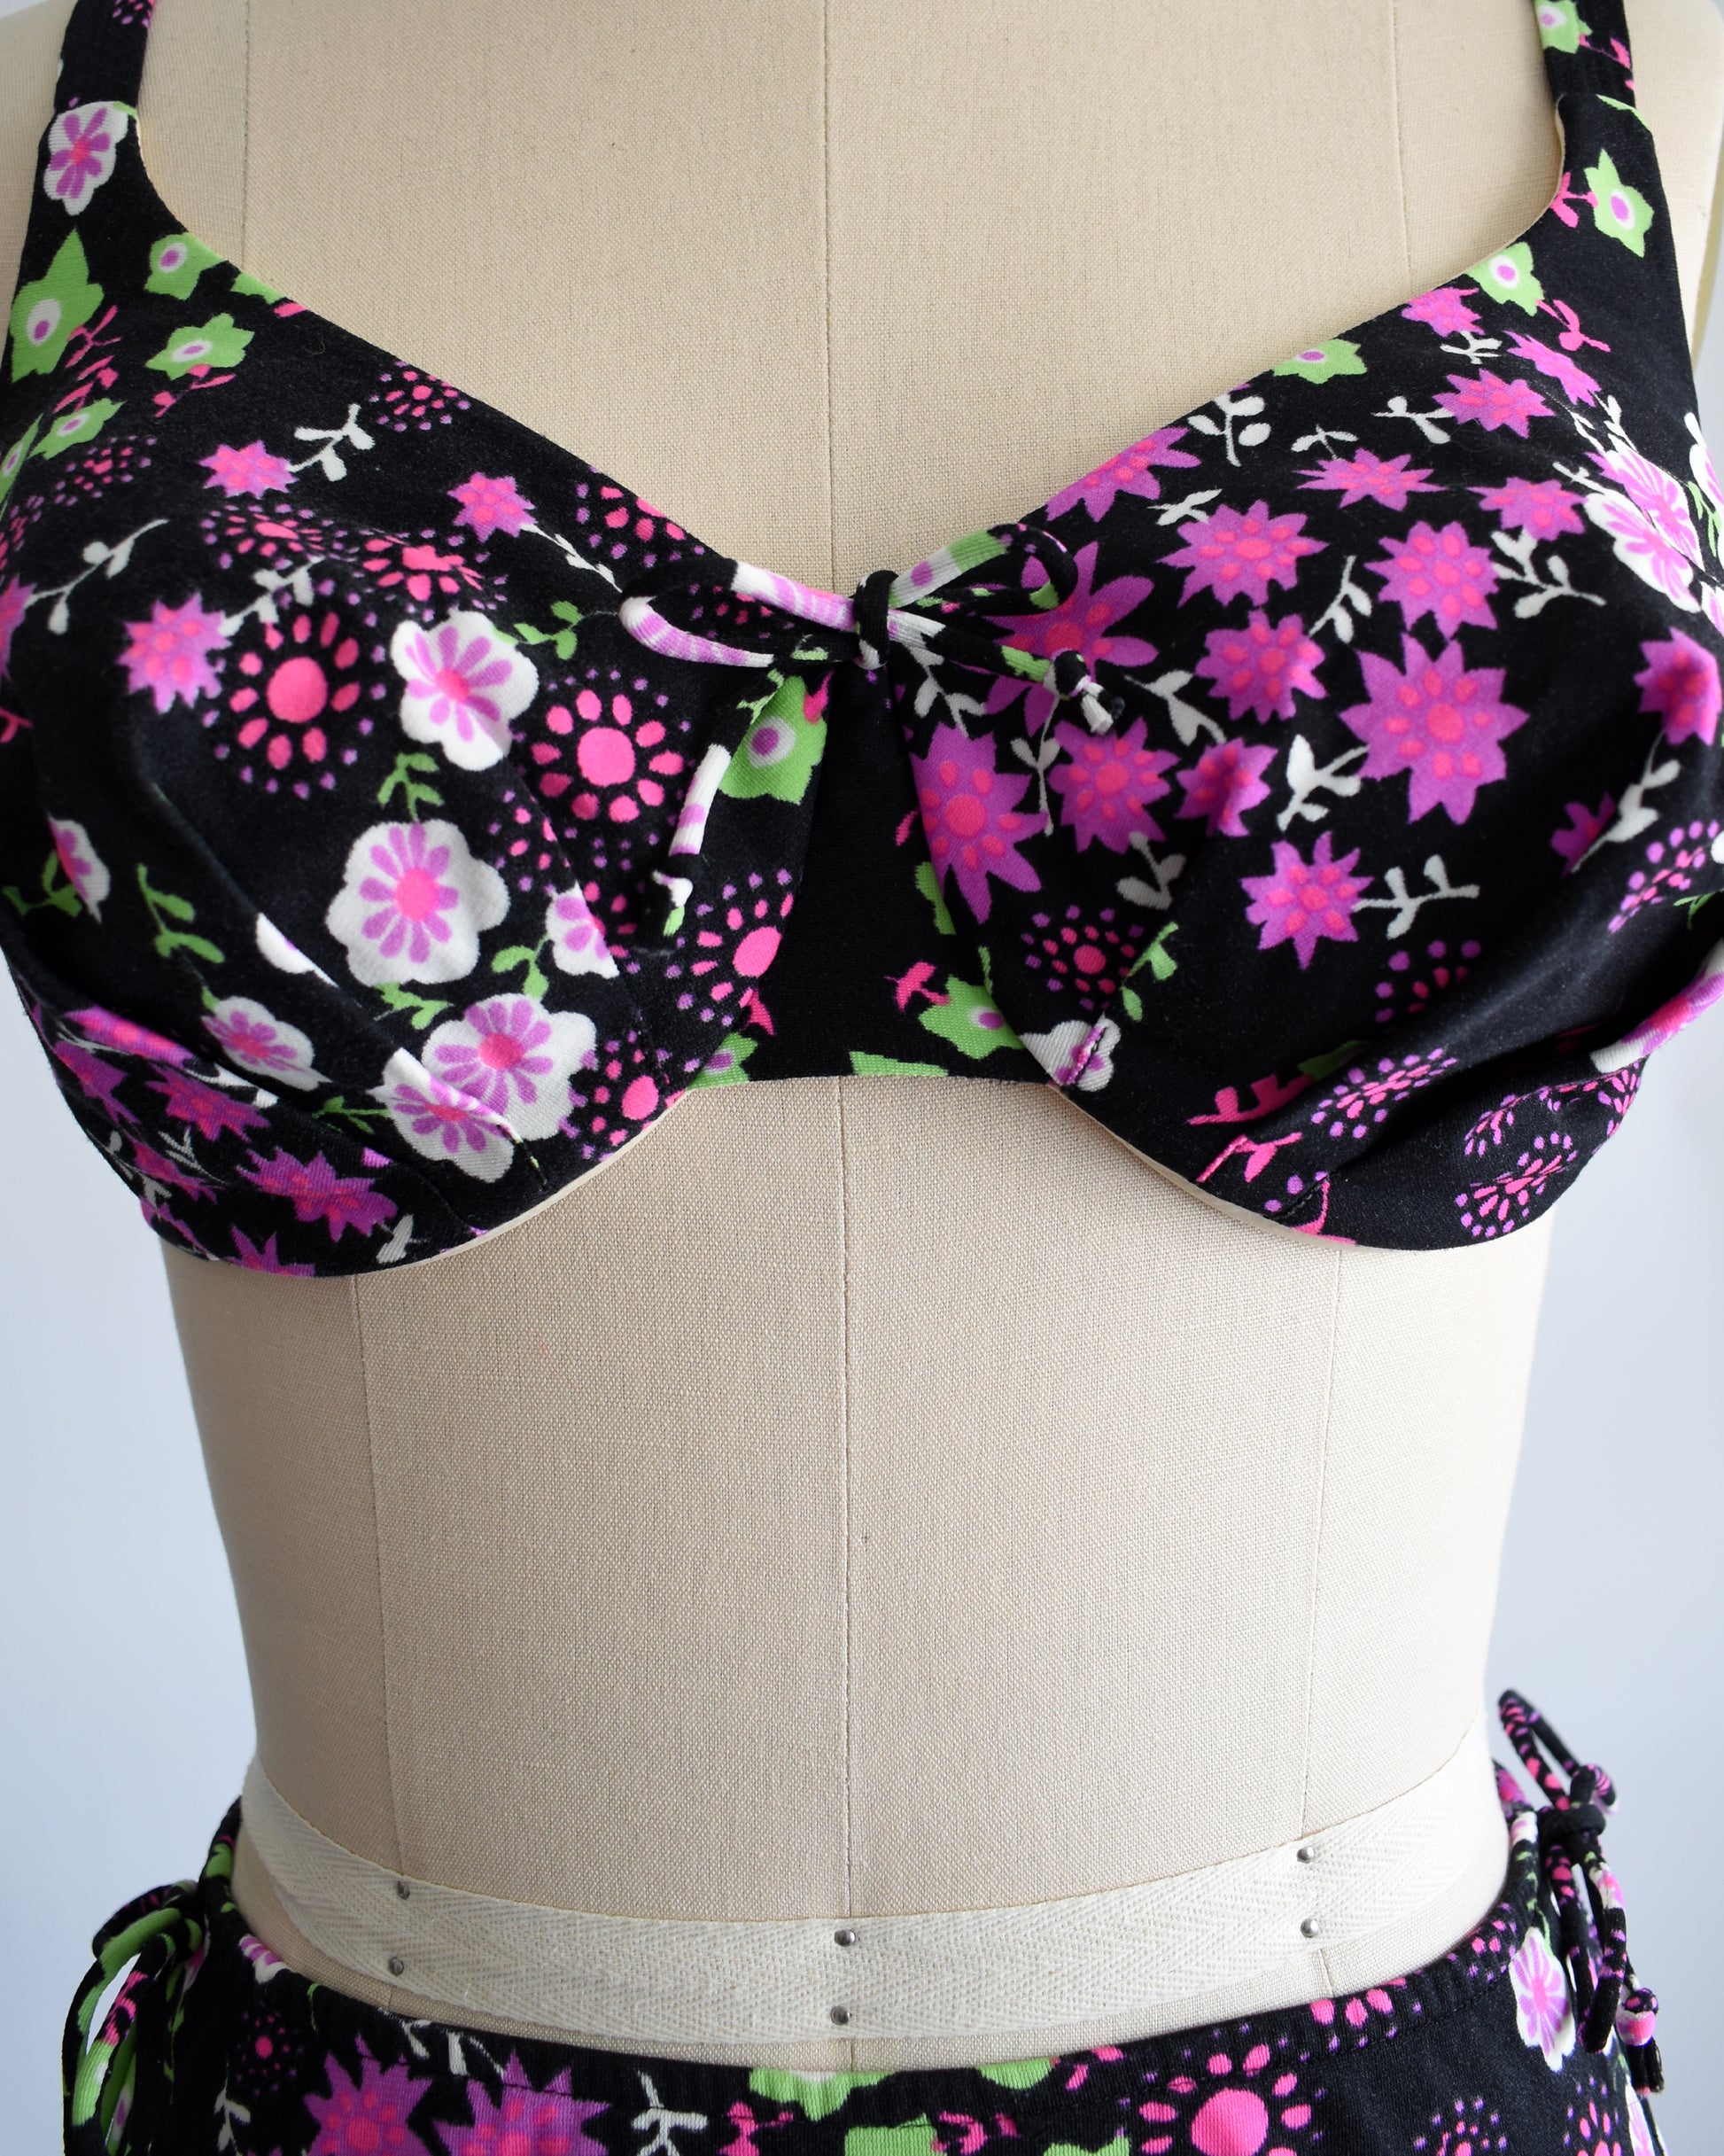 close up of the bow on the center of the bikini